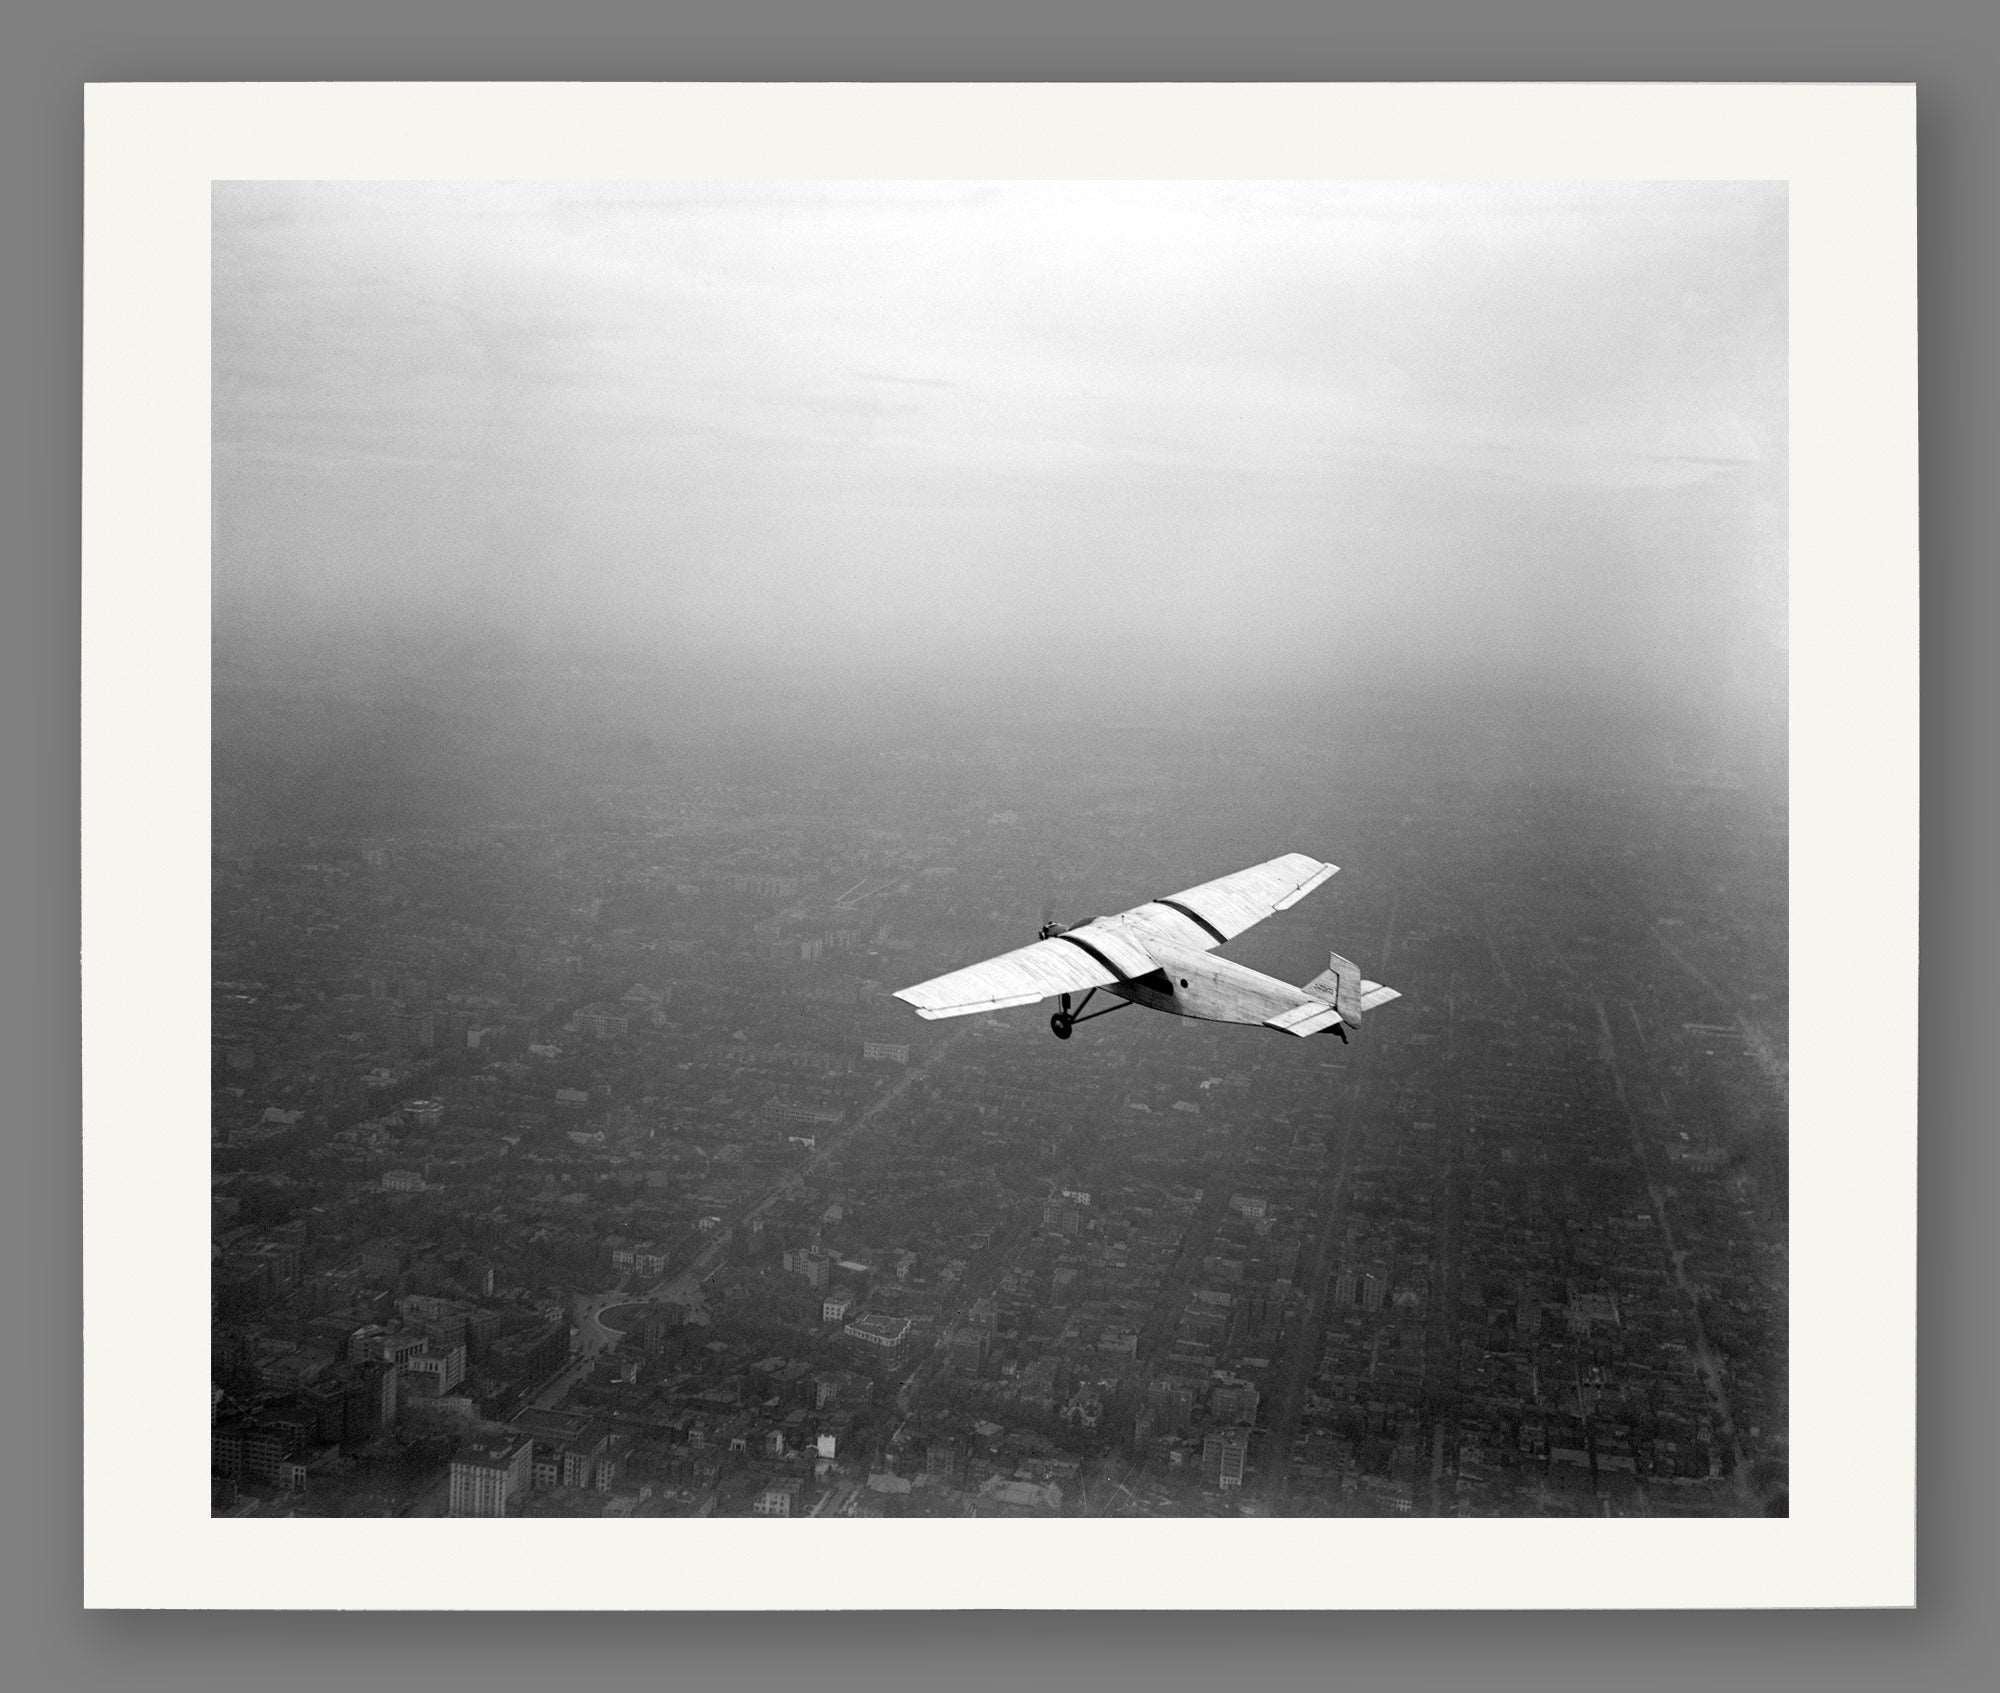 A fine art paper print featuring a vintage photograph of a Ford plane in flight